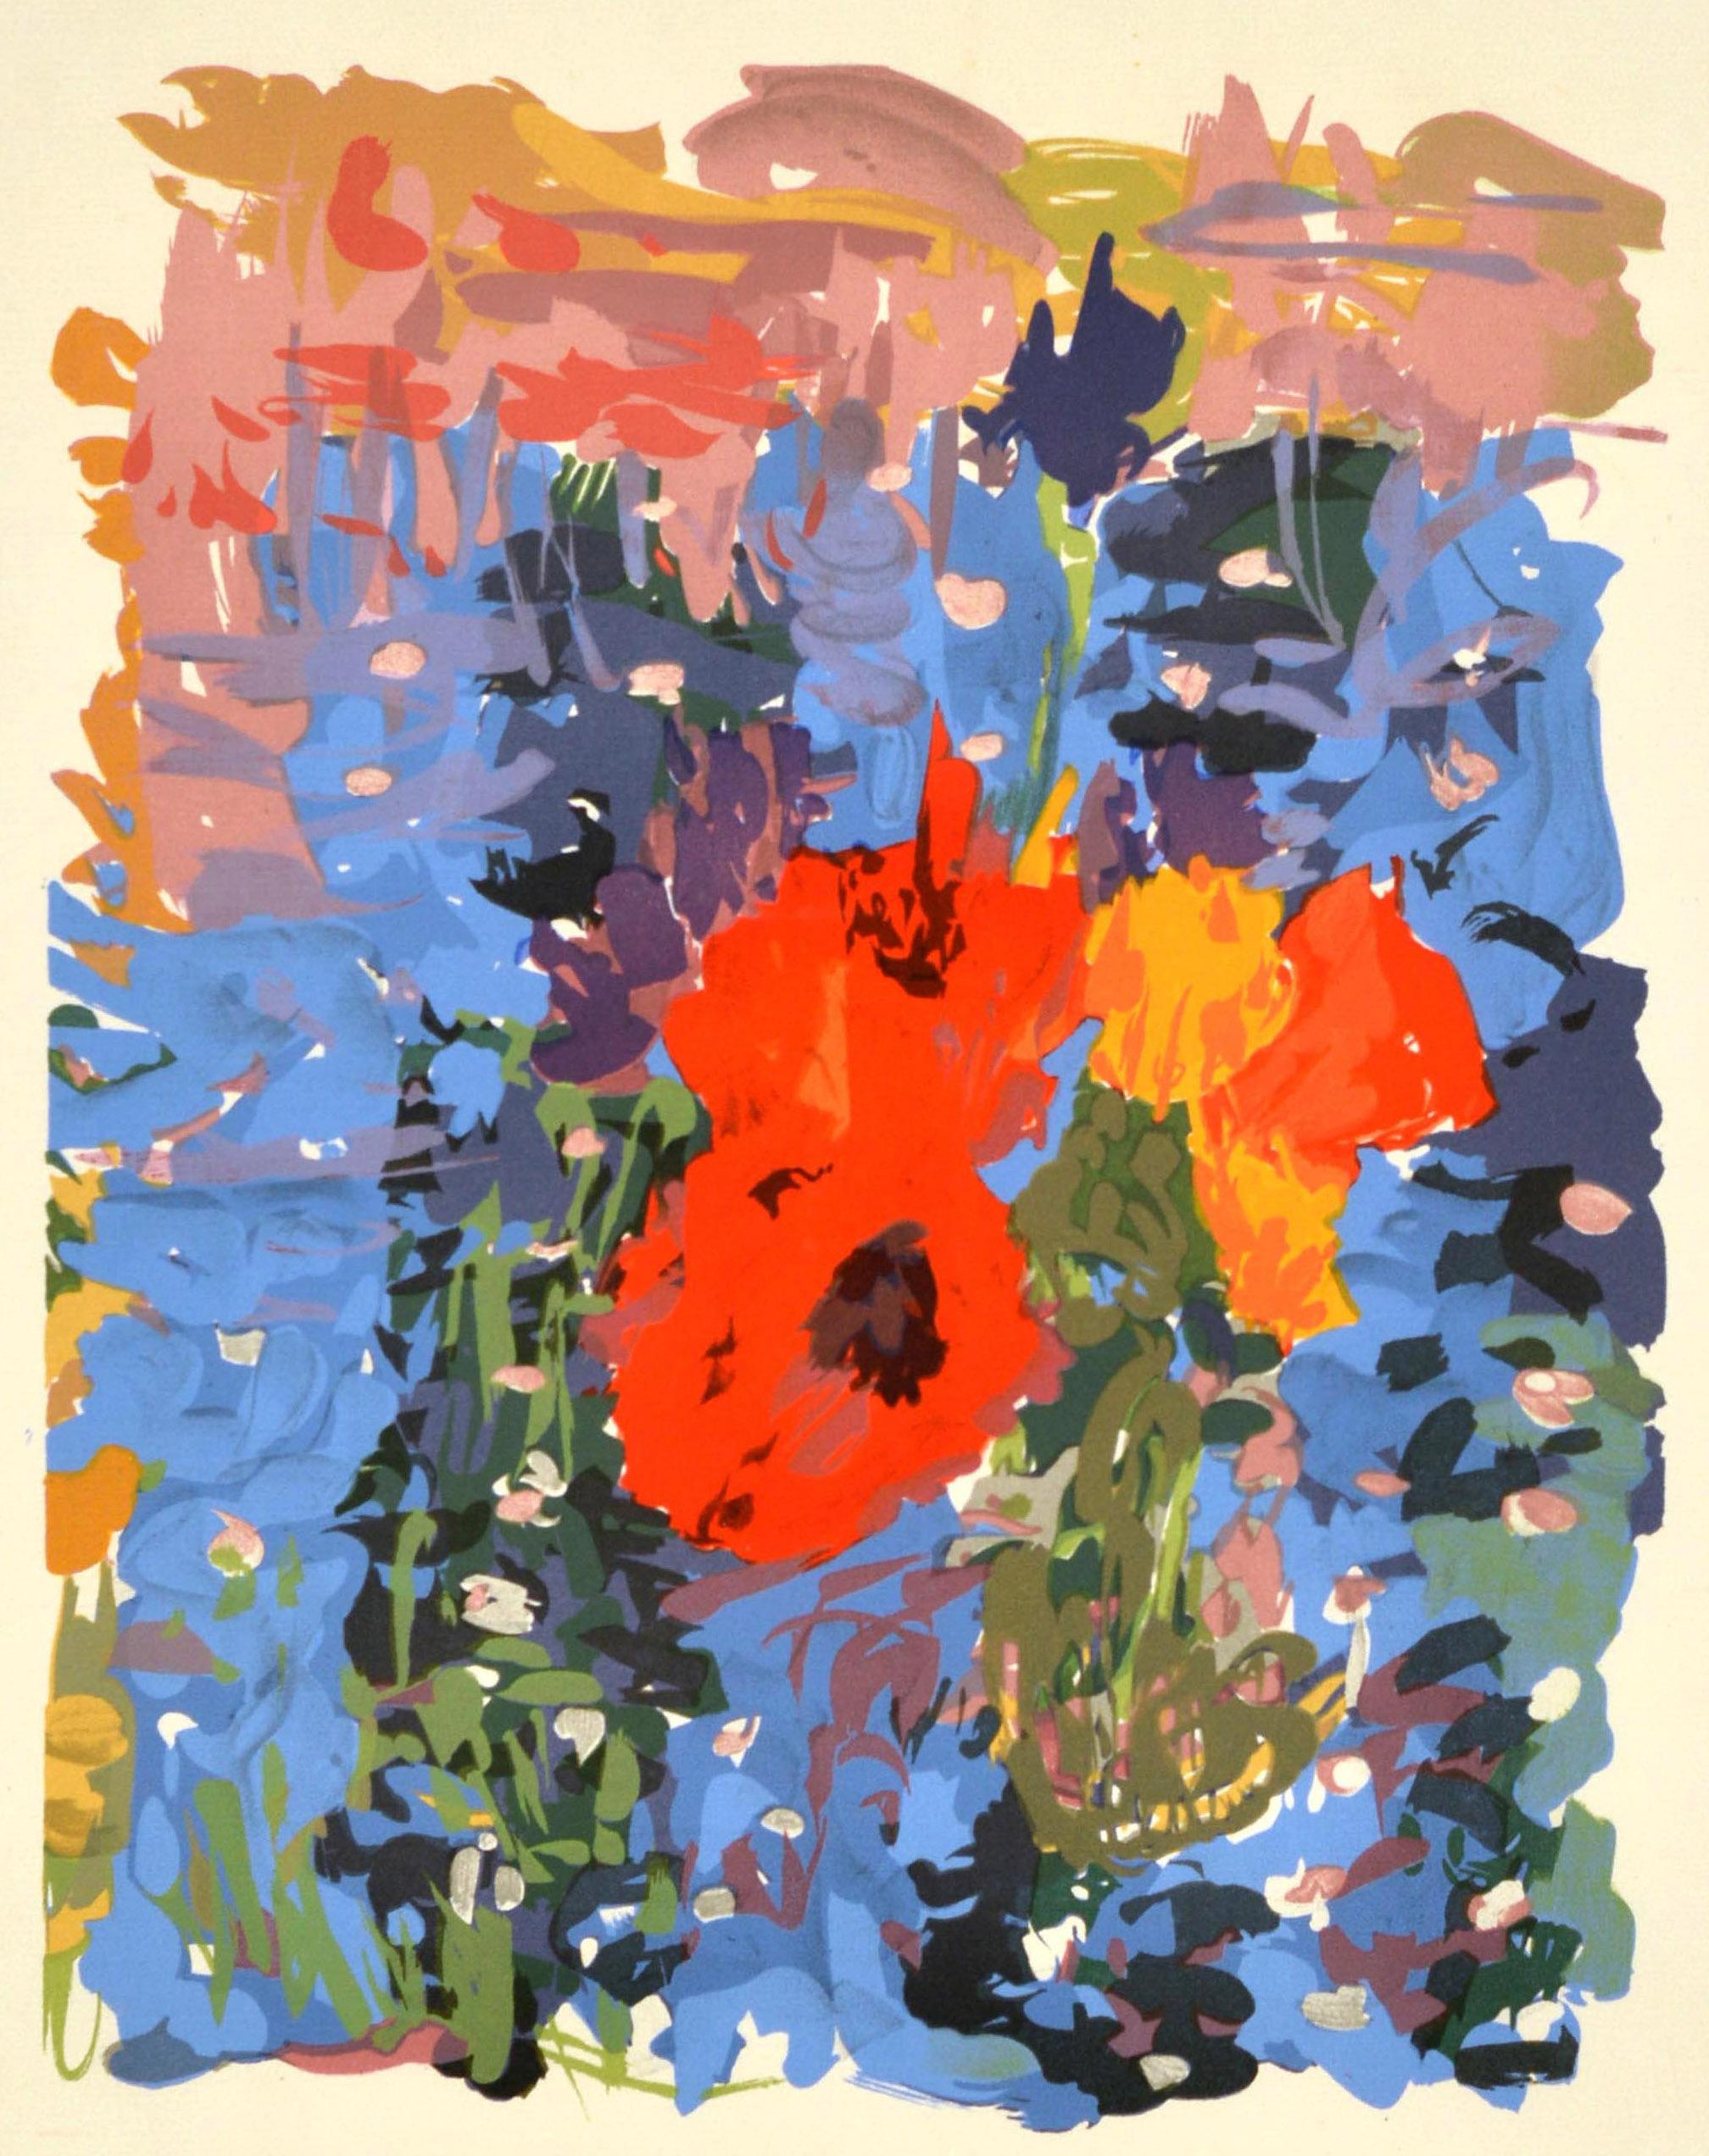 Original vintage art exhibition poster advertising Galerie Paul Ambroise Gauthier-Clerc 2-18 Fevrier / February 1962. Colourful abstract artwork of red poppies and other flowers on a blue and green background, the text above and below. Printed by